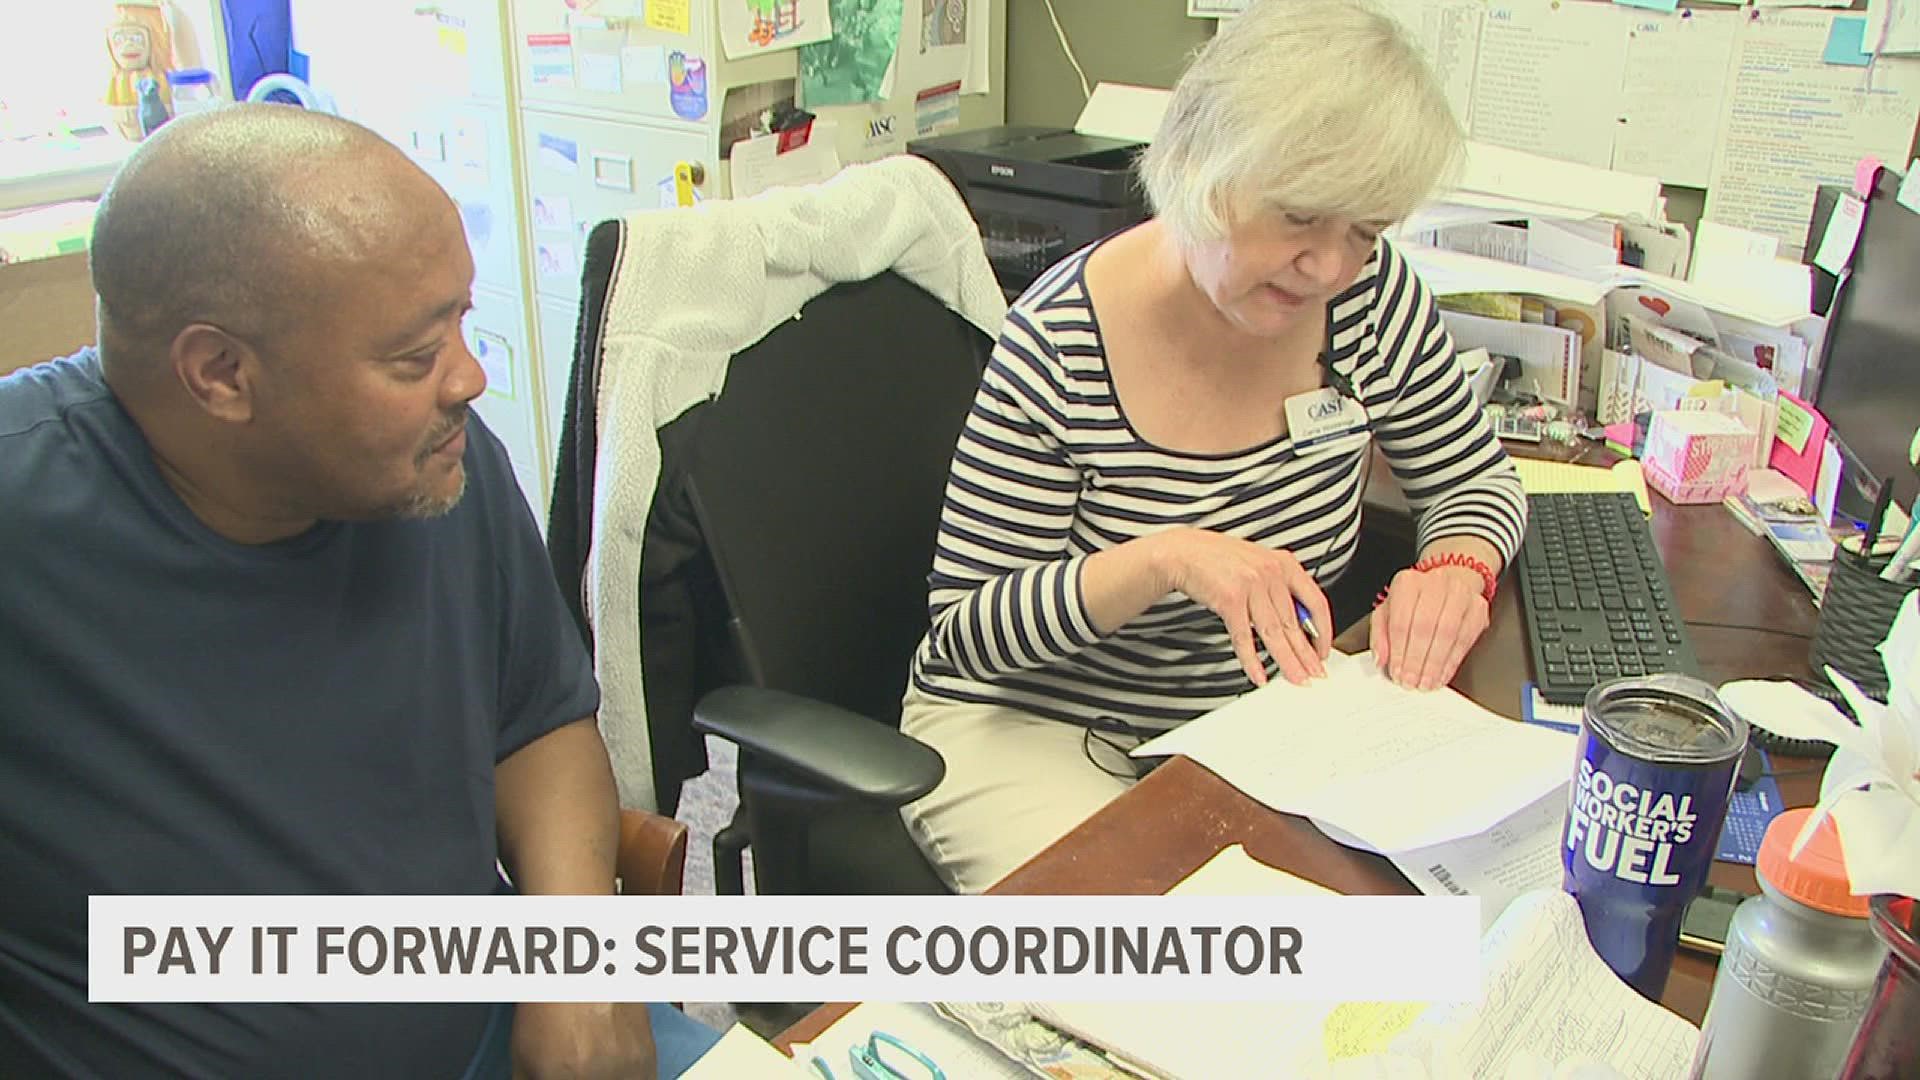 Wooldridge admits her work can be challenging, but she's loved serving others for 30 years. Her work has earned her this week's Pay It Forward Award.